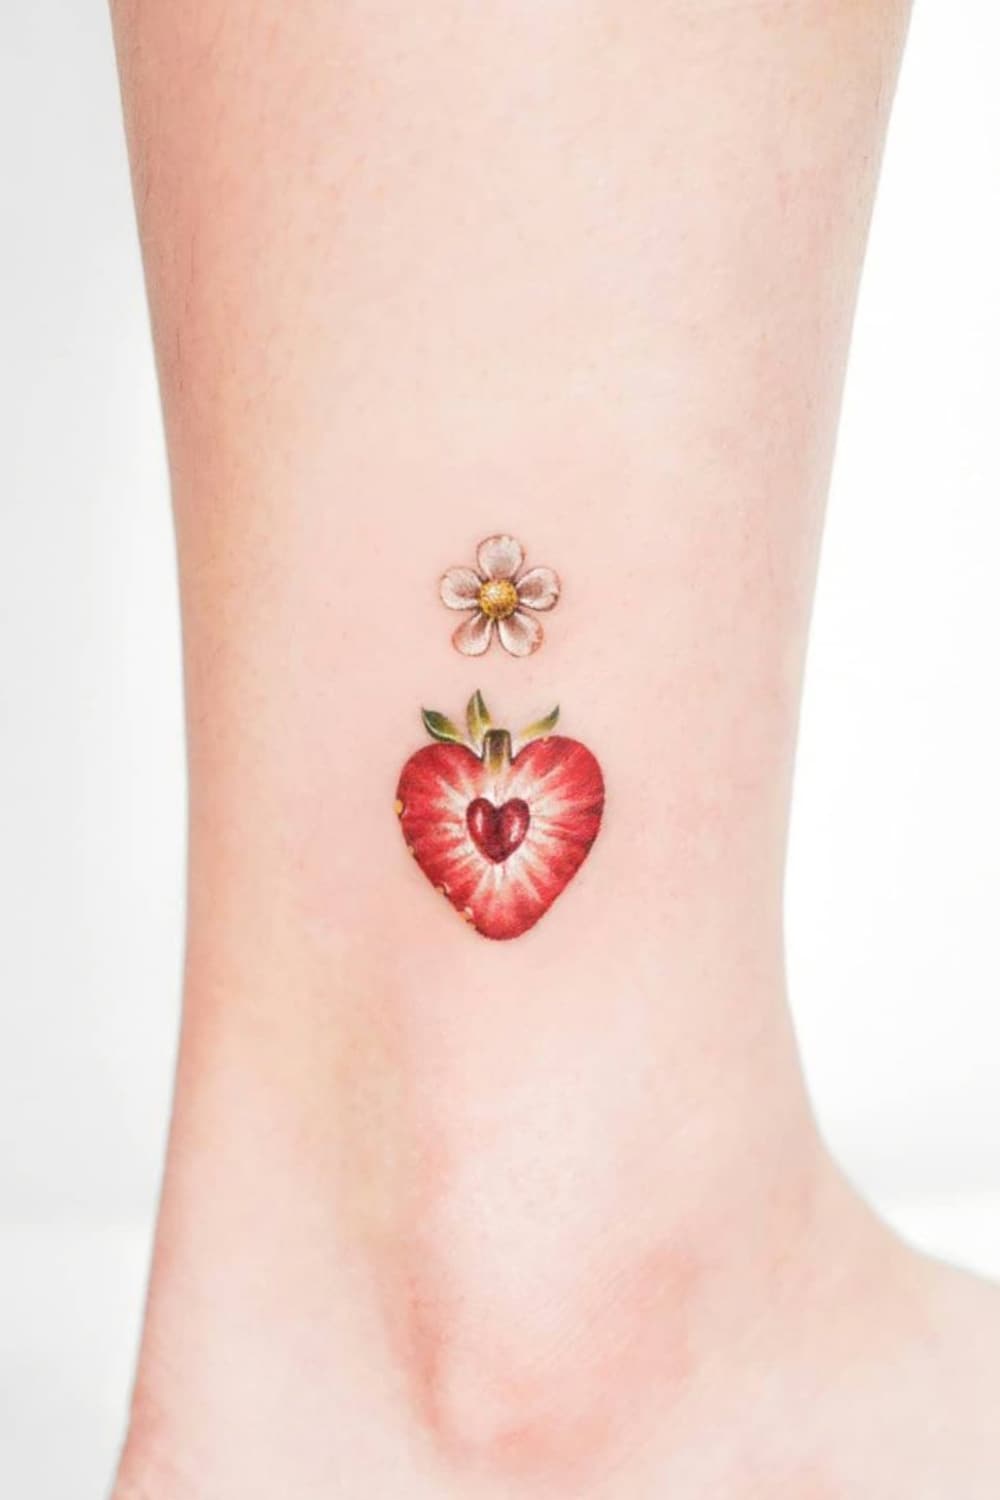 Strawberry Heart Tattoo With Flower